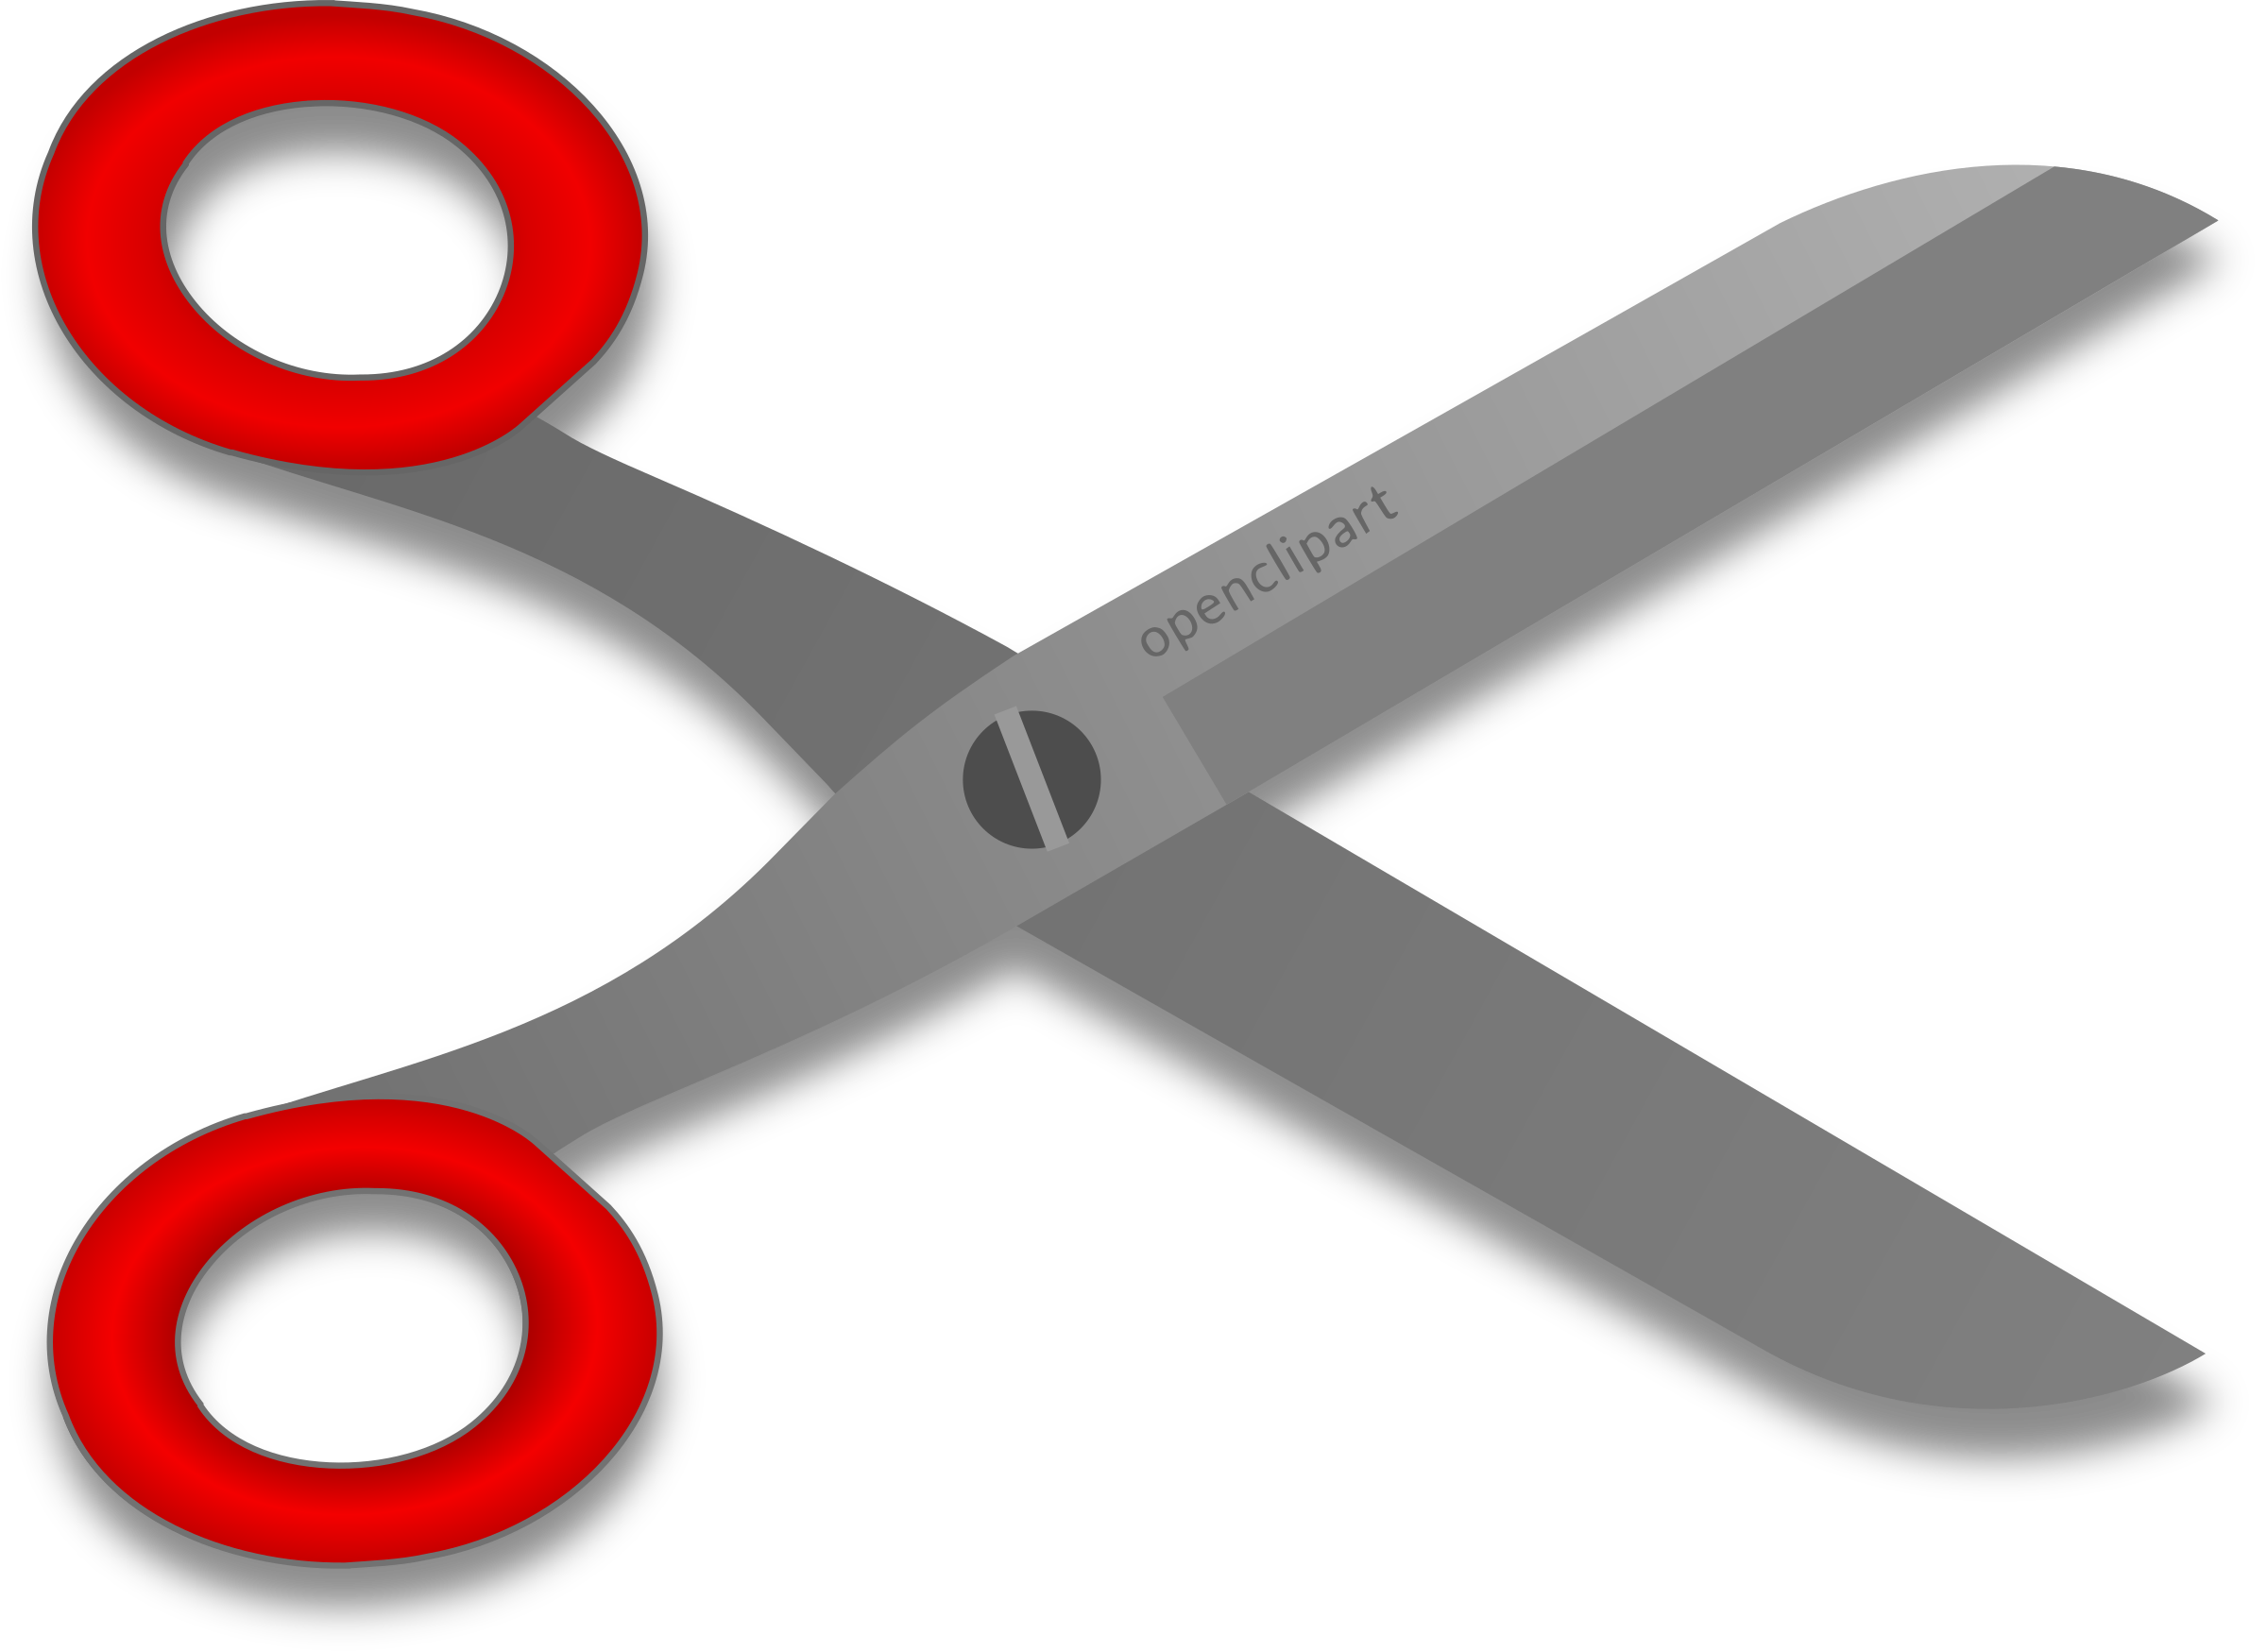 Openclipart Scissors with red ring SVG Clip arts